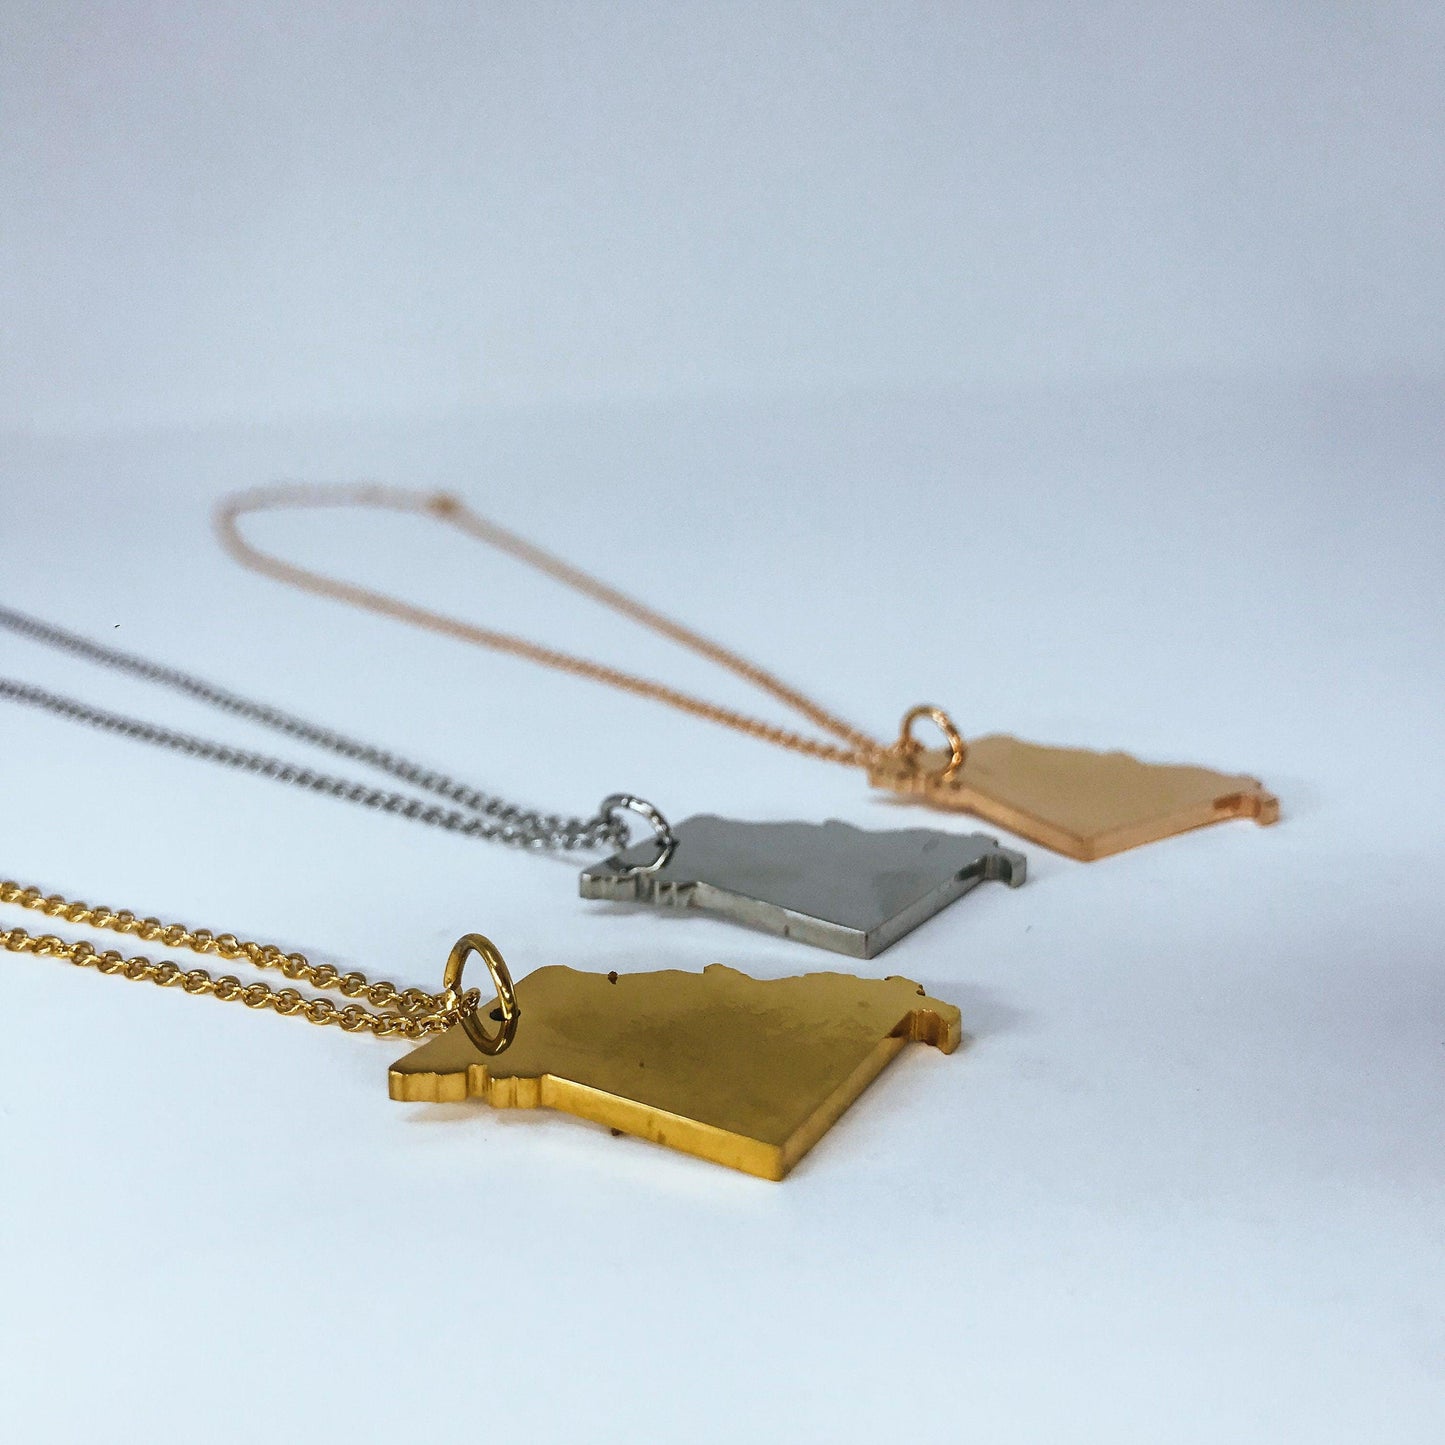 Missouri State Silhouette Necklaces in 3 different colors: Gold, Silver & Rose Gold